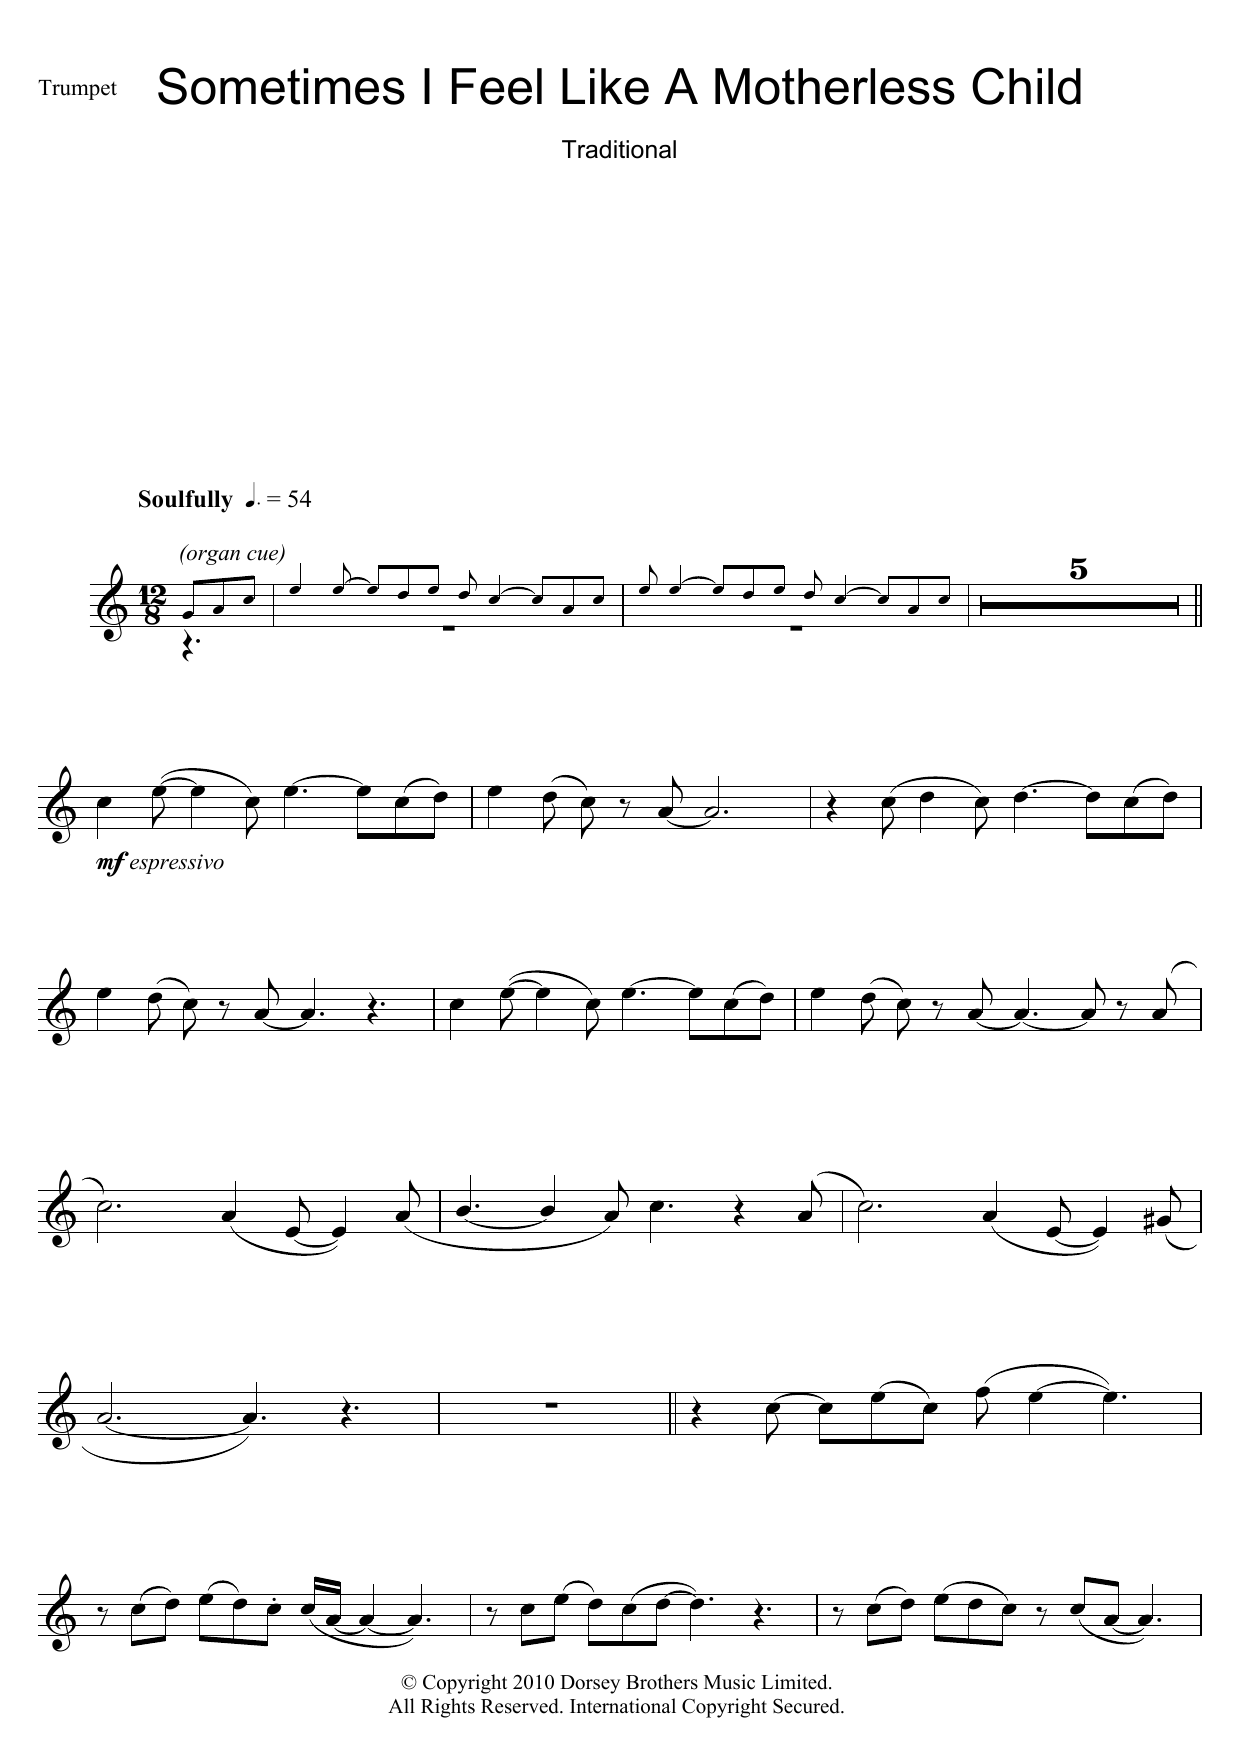 Download African-American Spiritual Sometimes I Feel Like A Motherless Chil Sheet Music